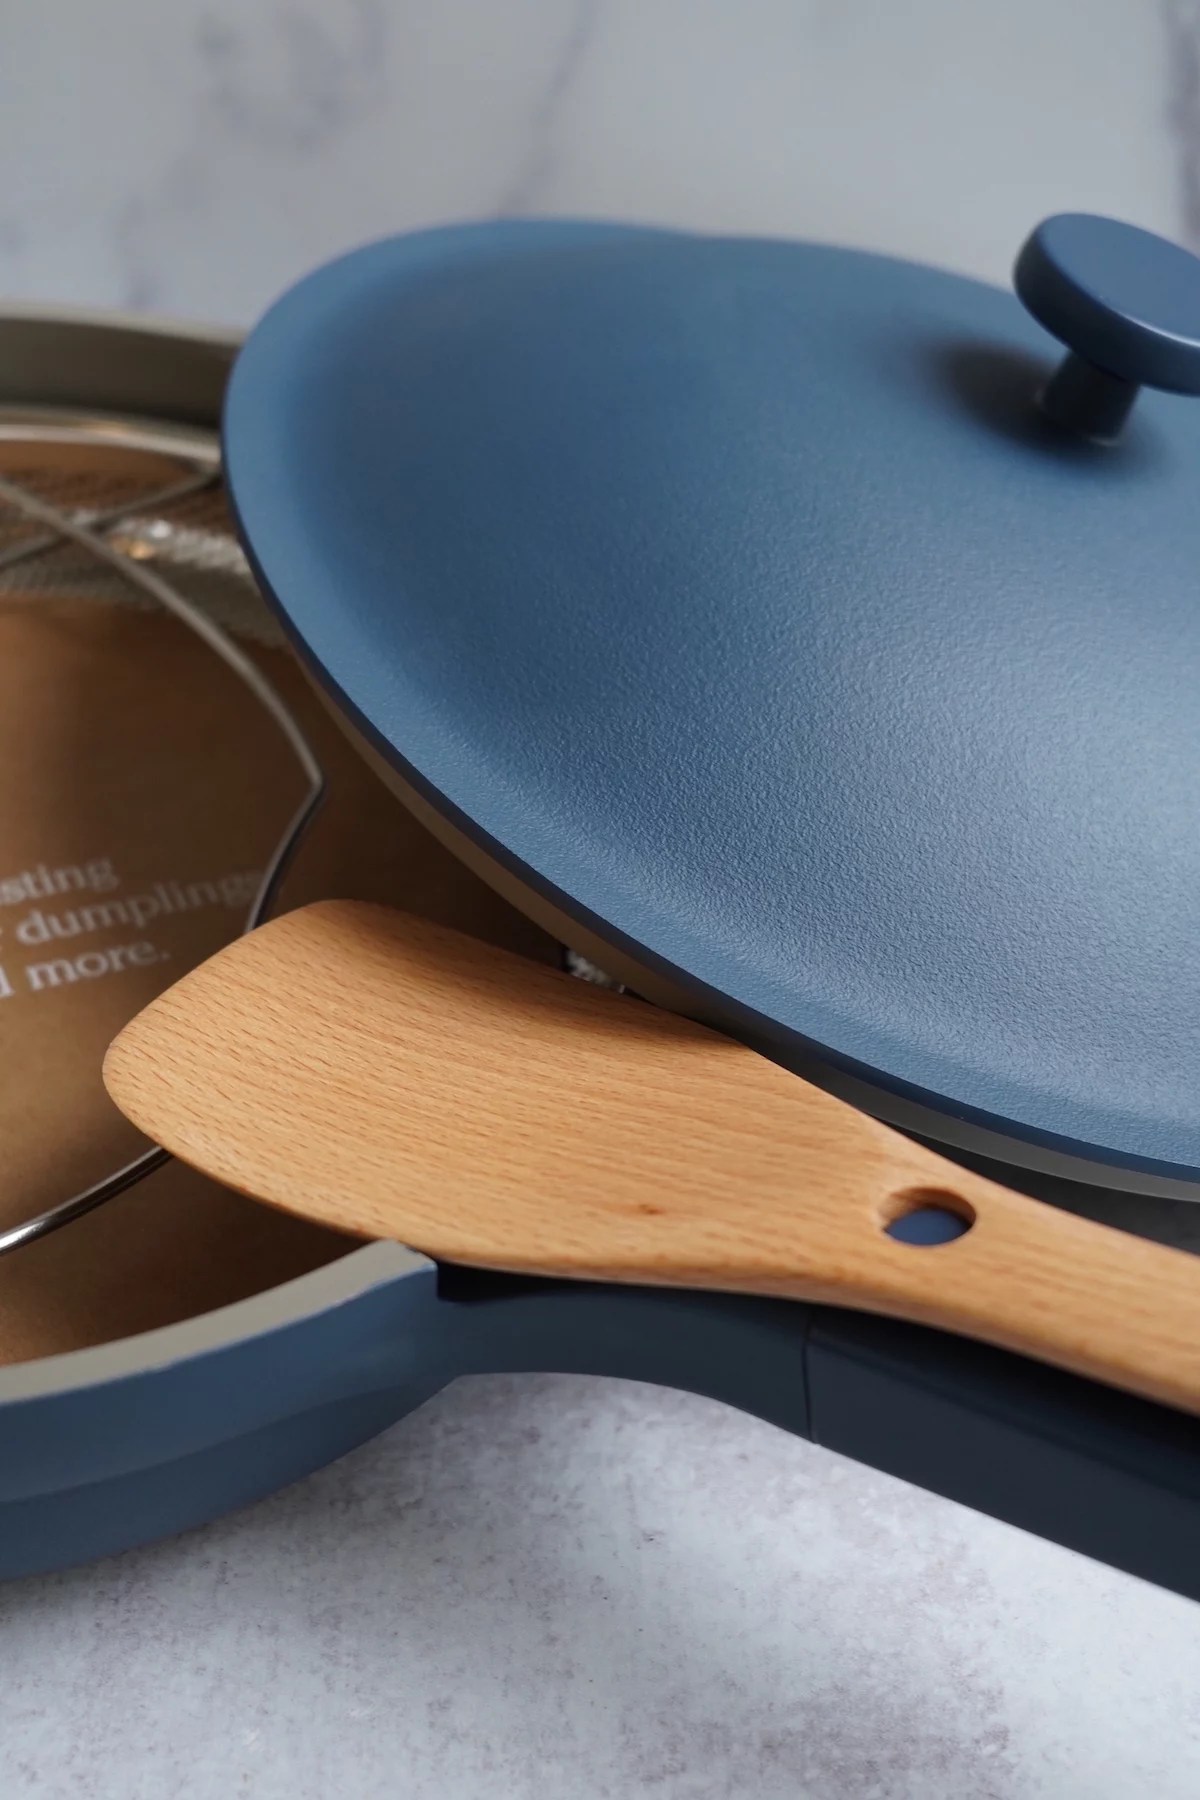 The Always Pan 2.0 Is Here—How Does It Differ from the Original?